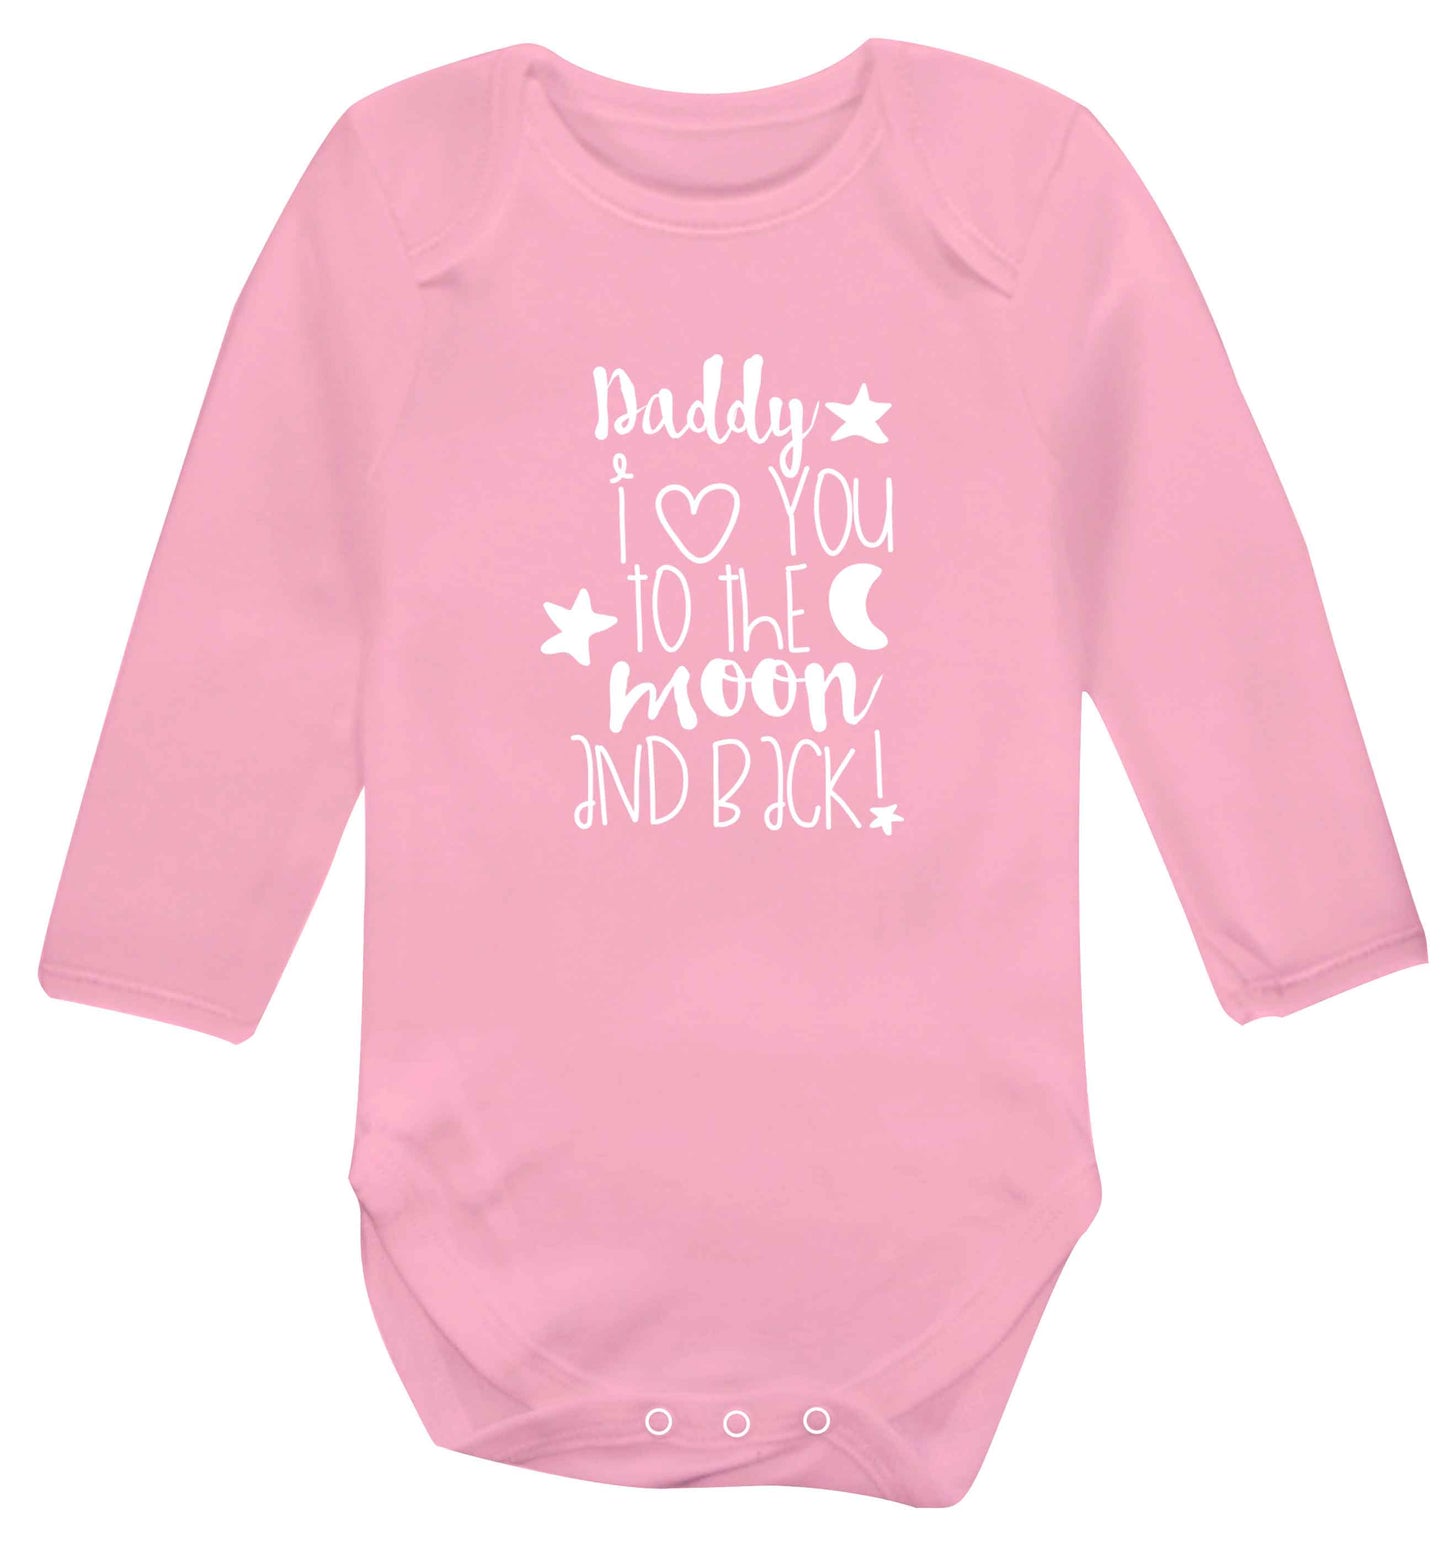 Daddy I love you to the moon and back baby vest long sleeved pale pink 6-12 months